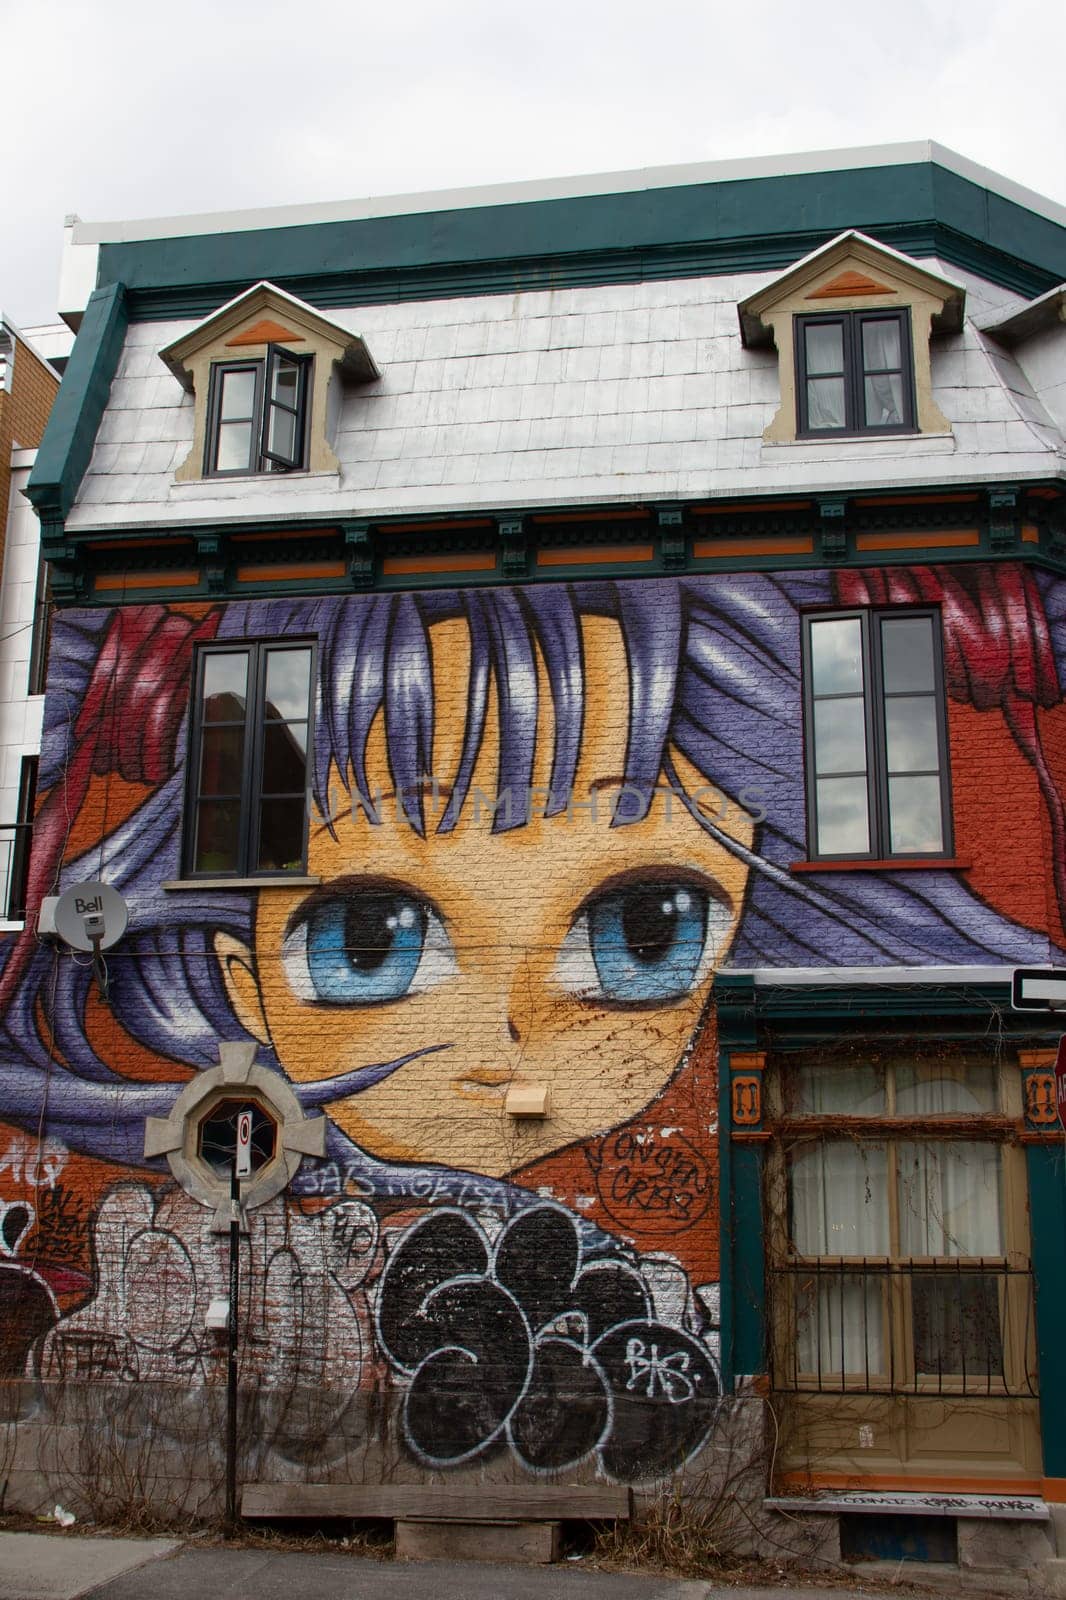 Graffiti street art mural lining a house of Montreal, Quebec by Granchinho